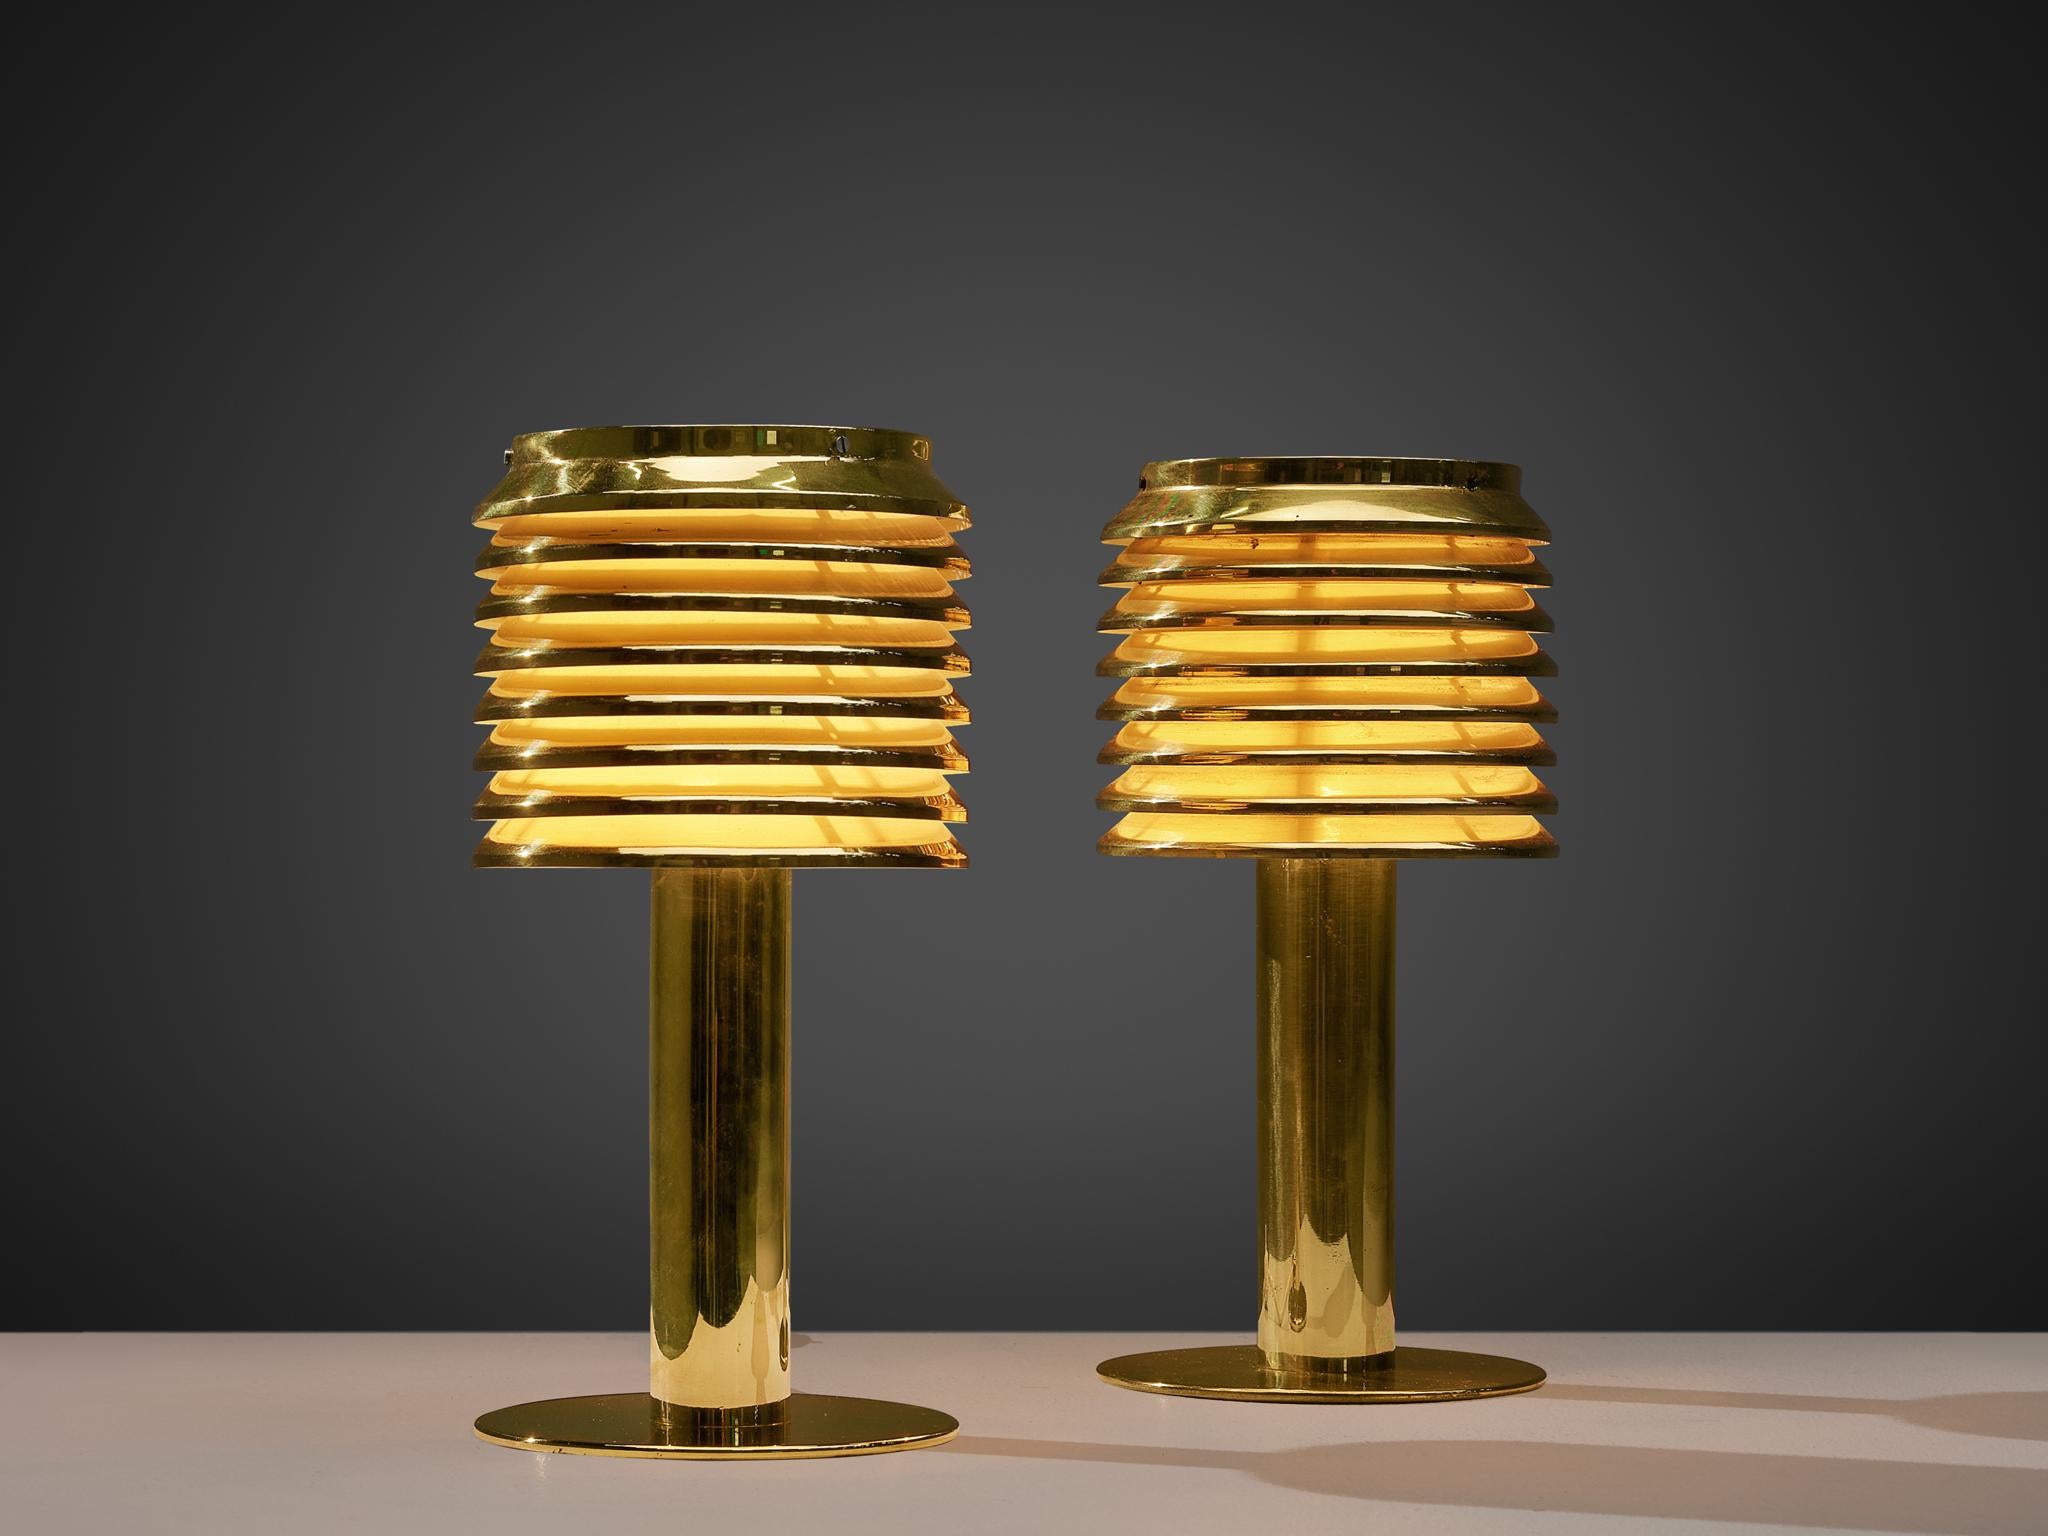 Hans-Agne Jakobsson, pair of table lamps model B-142, brass, Sweden, 1960s

Luxurious pair of table lights, designed by the Swedish master of light Hans-Agne Jakobsson. This model, called B-142, features a brass foot that holds a brass shade. The